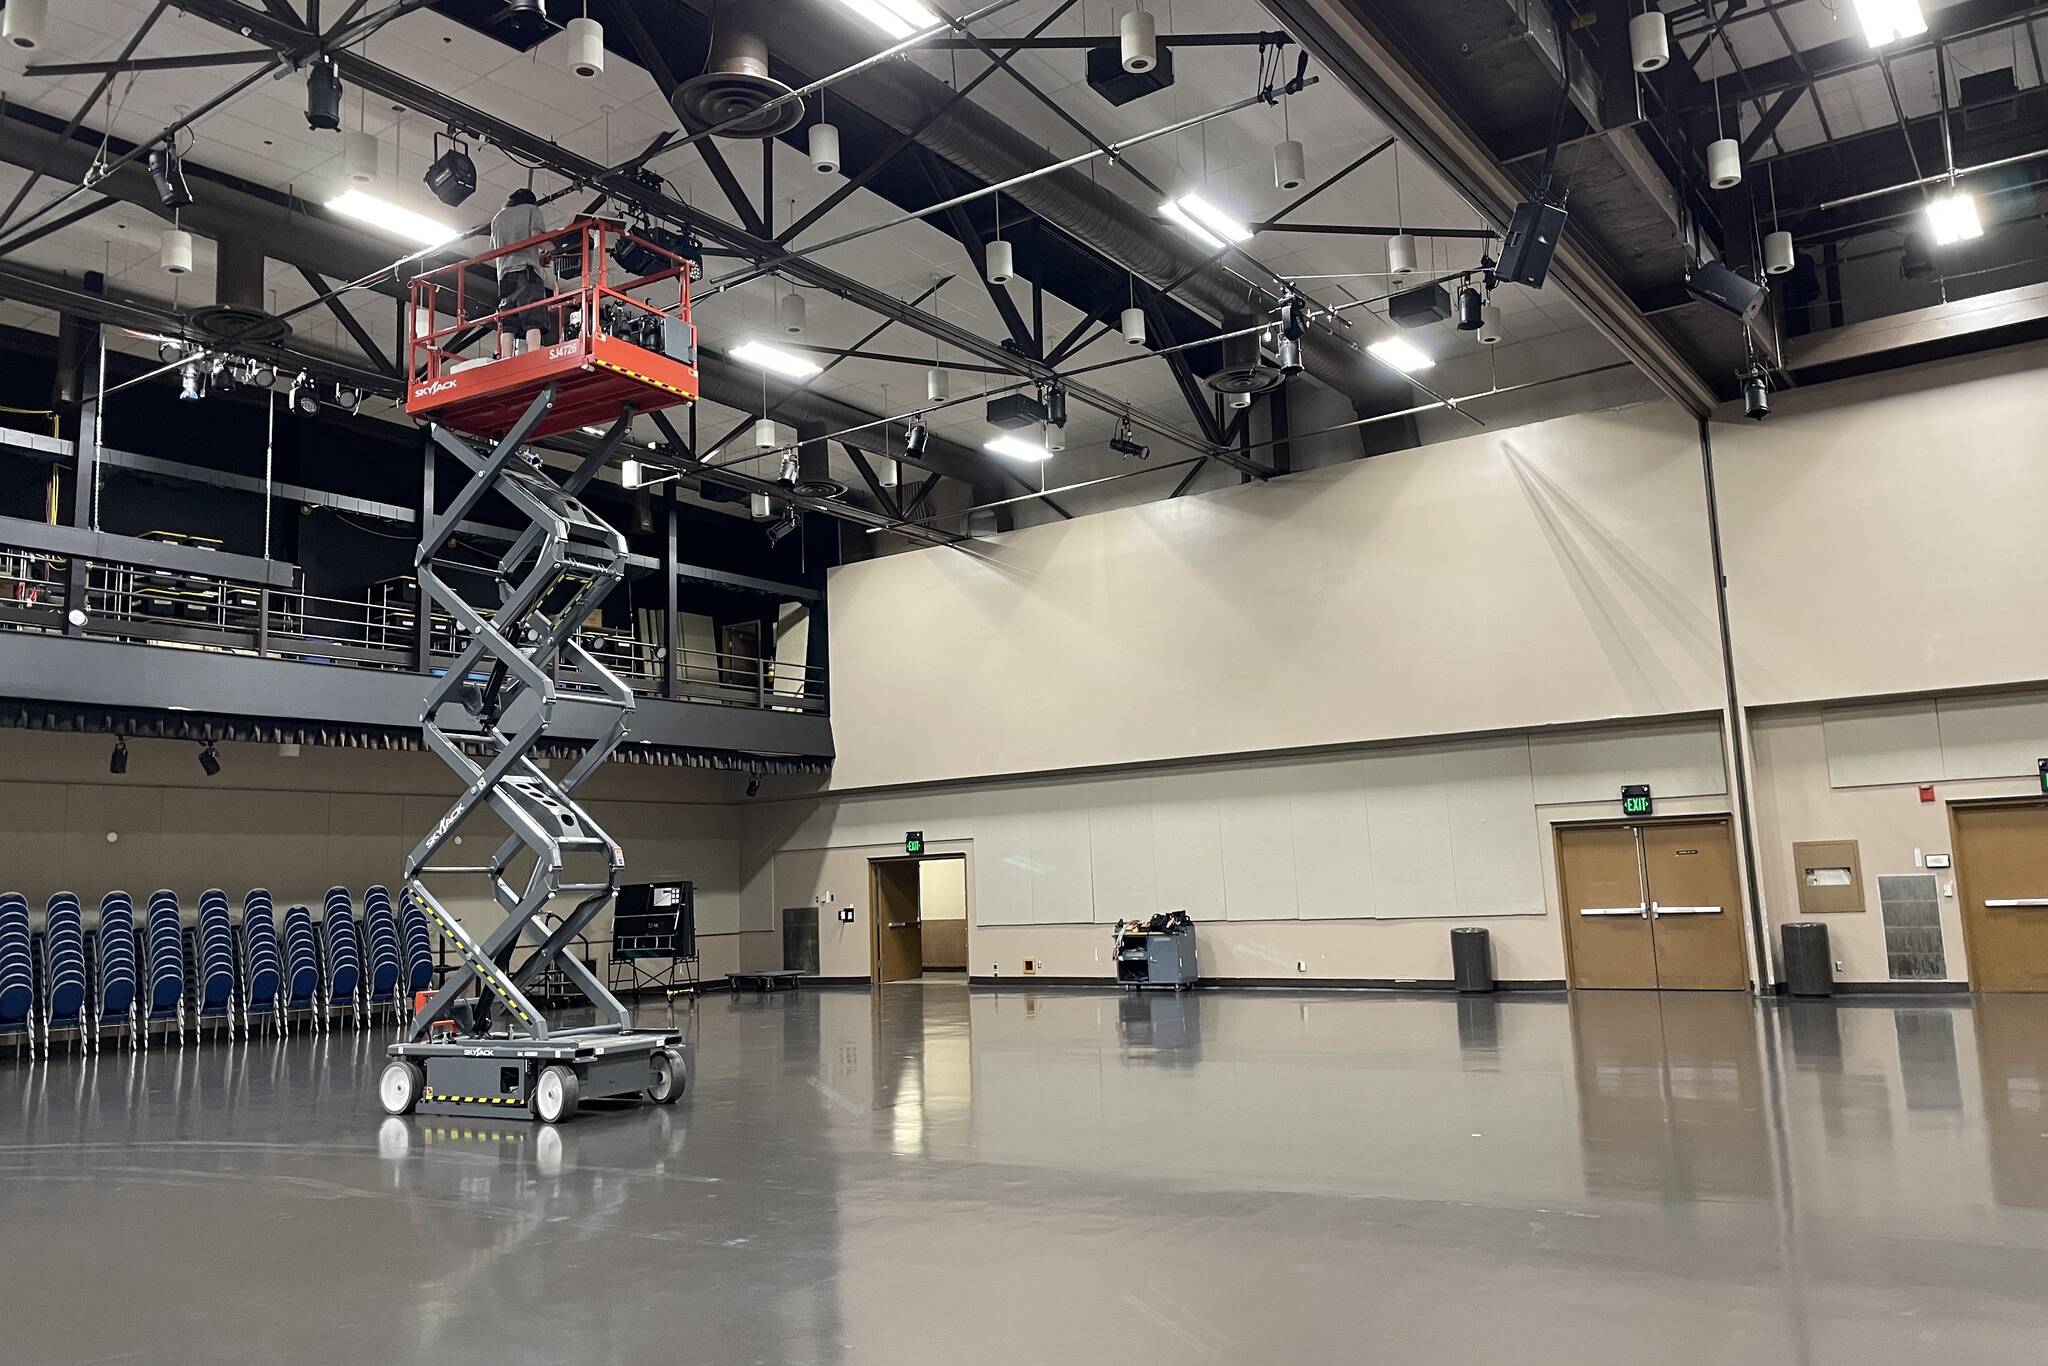 Centennial Hall crewmember Dylan Taylor, atop the lift, prepares equipment for GLITZ, which returns to the hall this weekend, on June 15, 2022. (Michael S. Lockett / Juneau Empire)